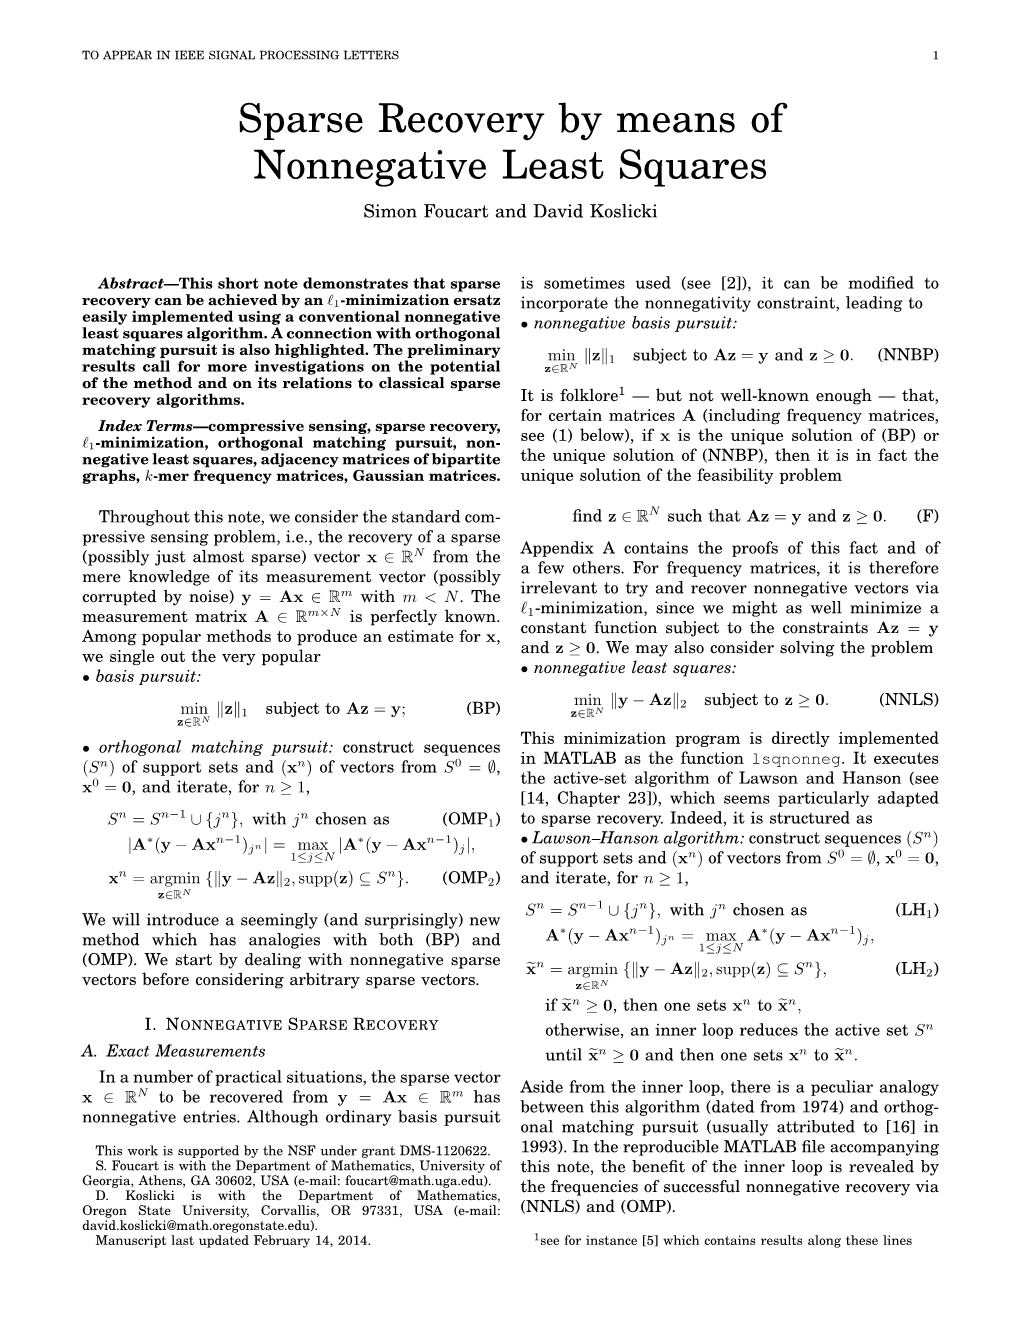 Sparse Recovery by Means of Nonnegative Least Squares Simon Foucart and David Koslicki